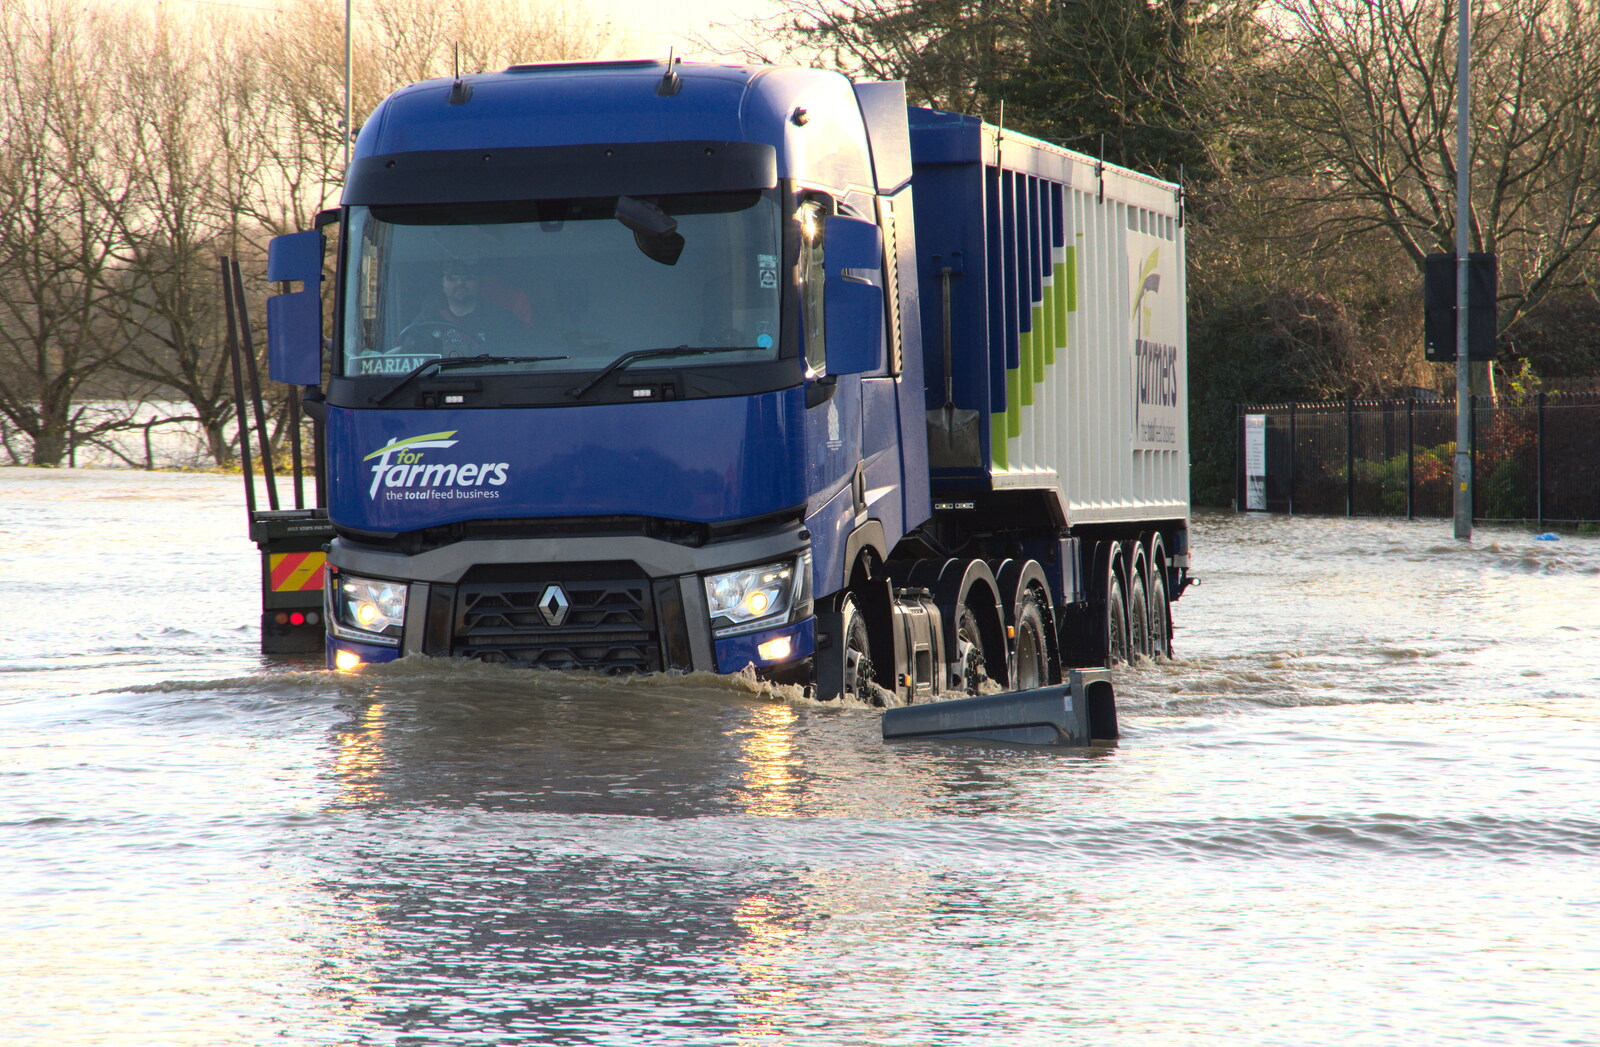 A For Farmers HGV ploughs through the flood from The Christmas Eve Floods, Diss, Norfolk - 24th December 2020